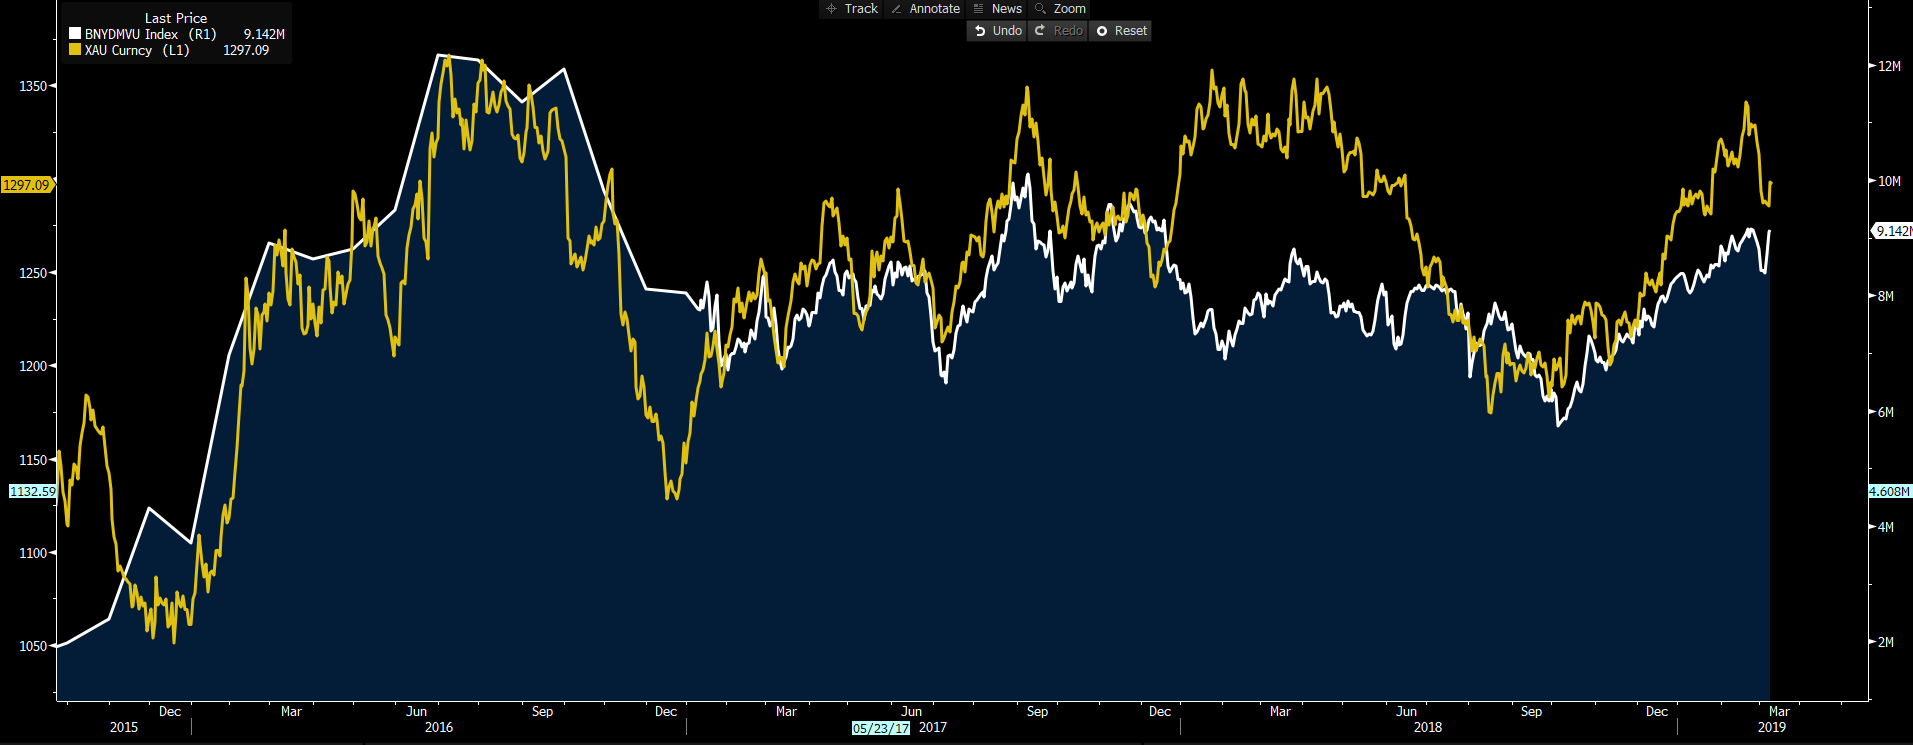 Yellow - Spot Gold, White - Total Value Of Negative Yielding Bonds